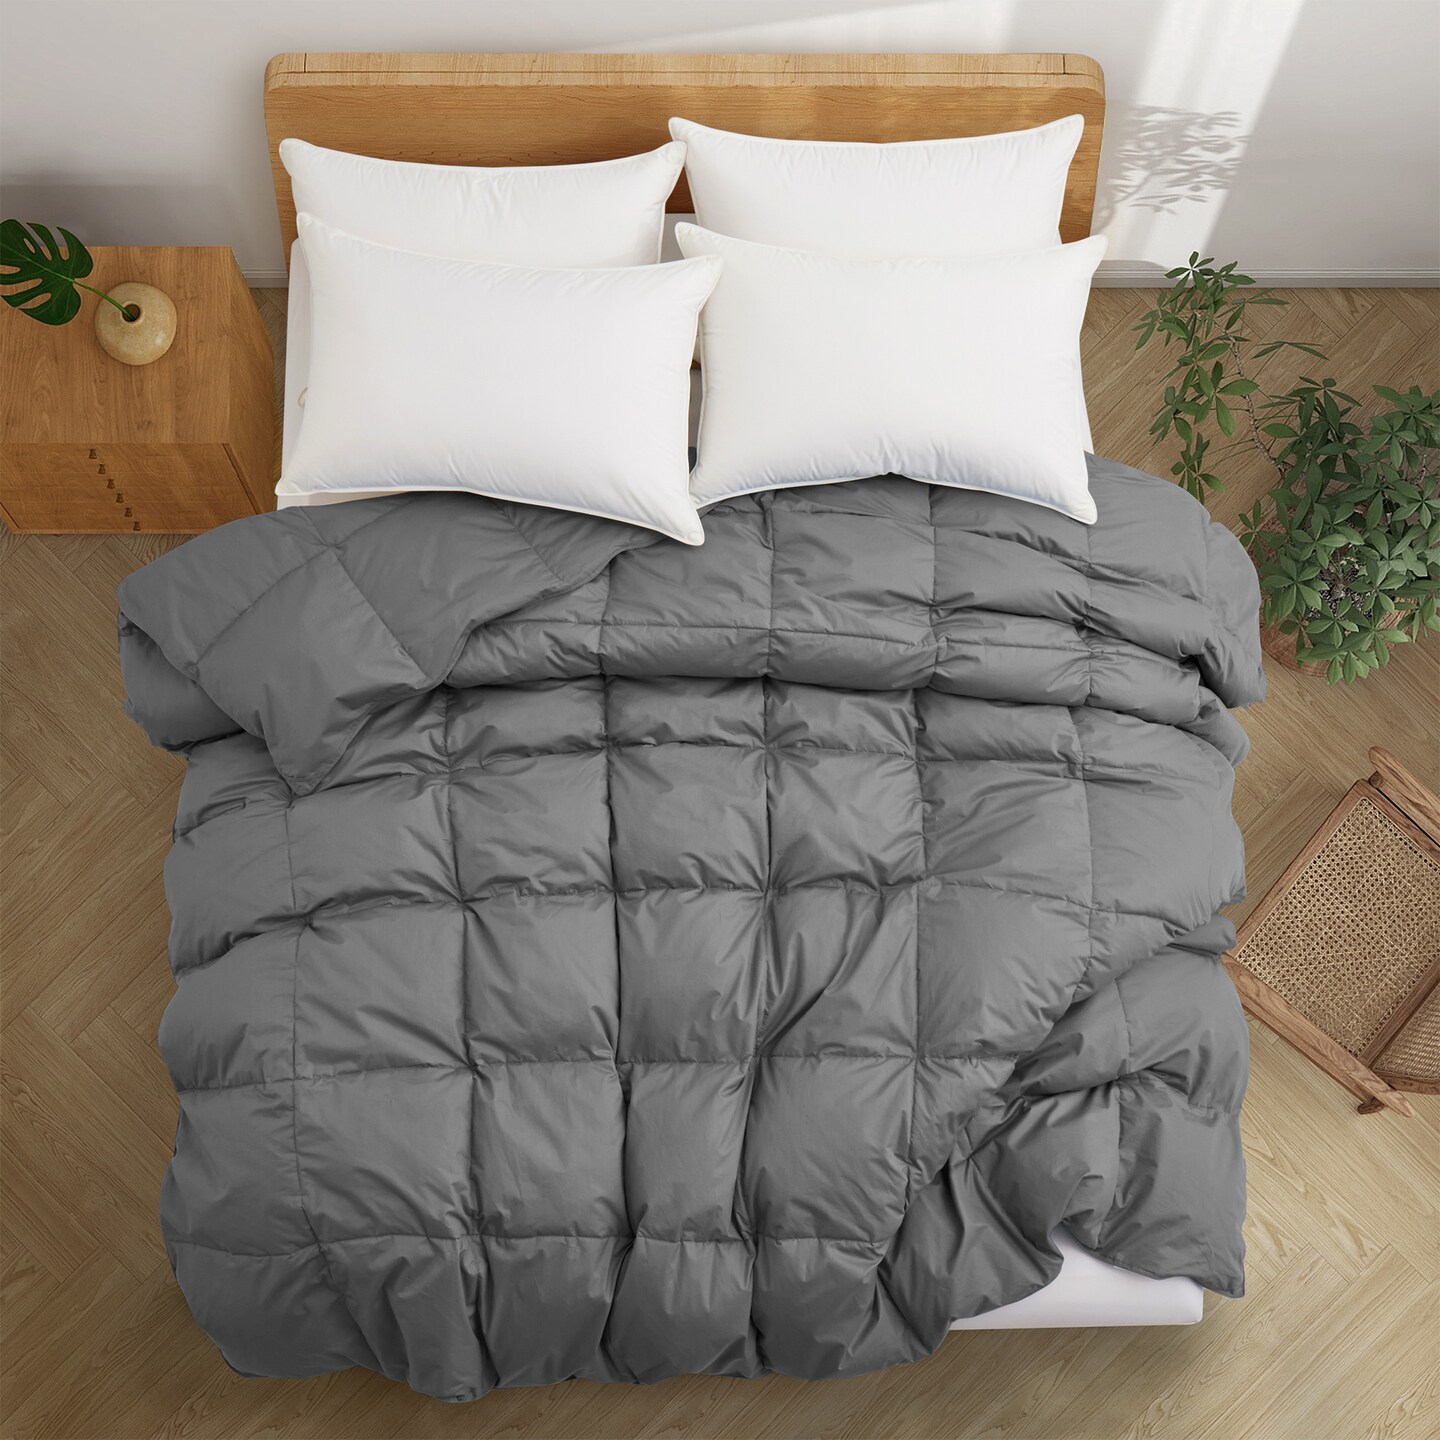 Peace Nest Goose Down Feather Fiber Comforter - Organic Cotton Cover for Soft Breathable Comfort